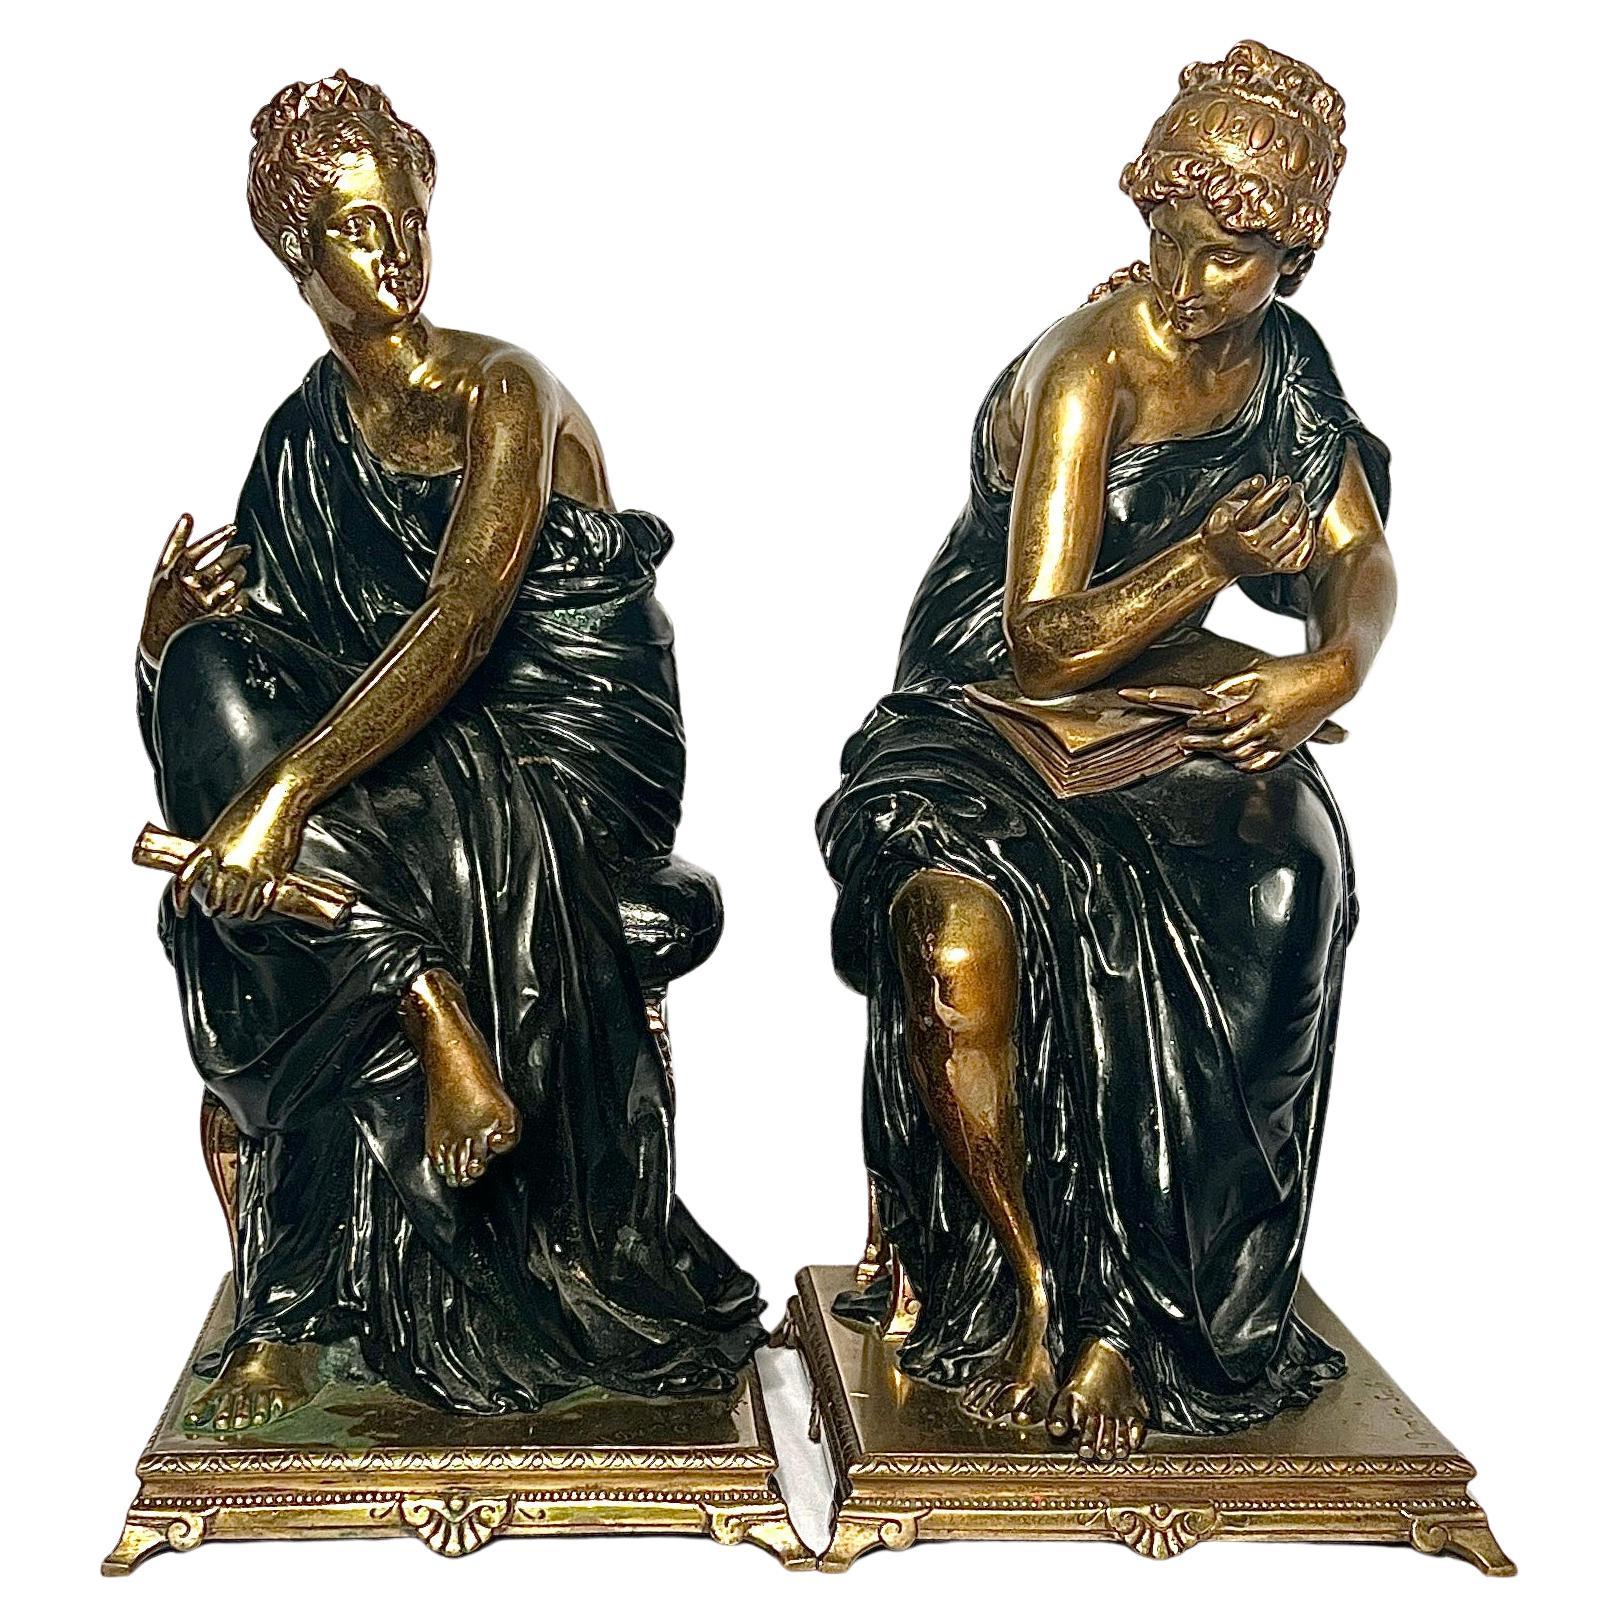 Pair Antique 19th Century French Bronze Sculptures, Seated Ladies by H. Dumaige.